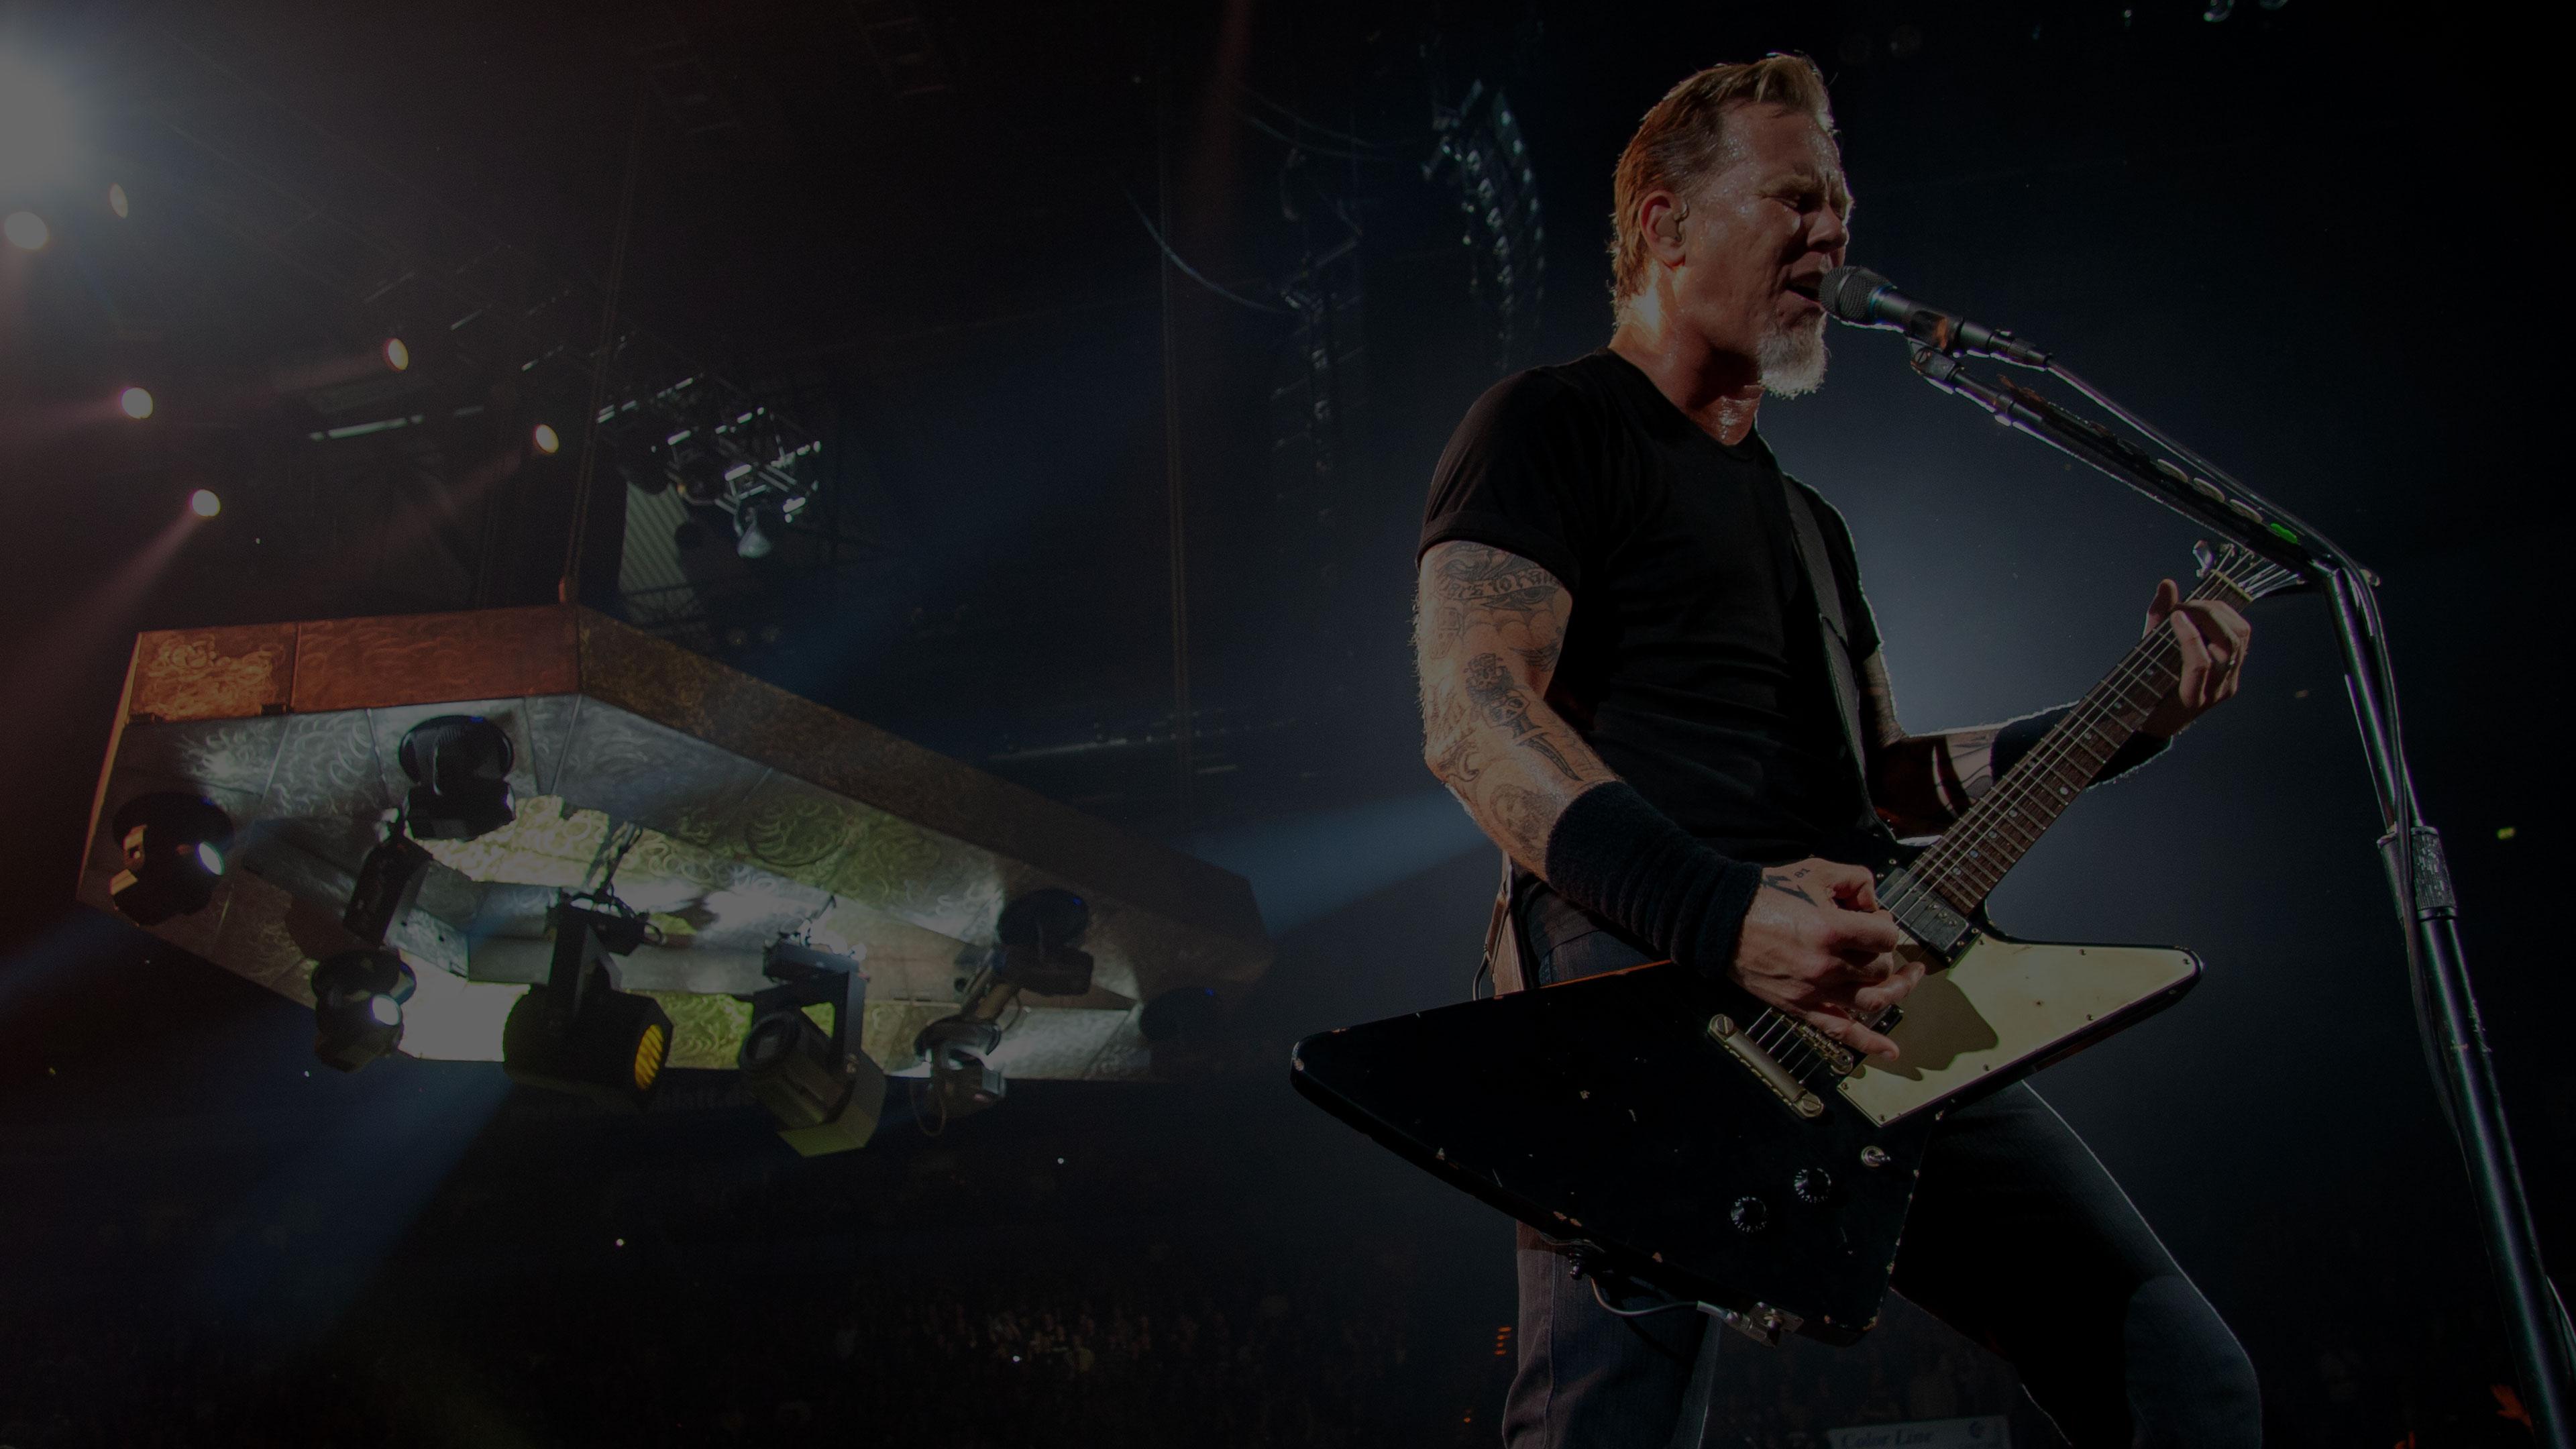 Metallica at Color Line Arena in Hamburg, Germany on May 12, 2009